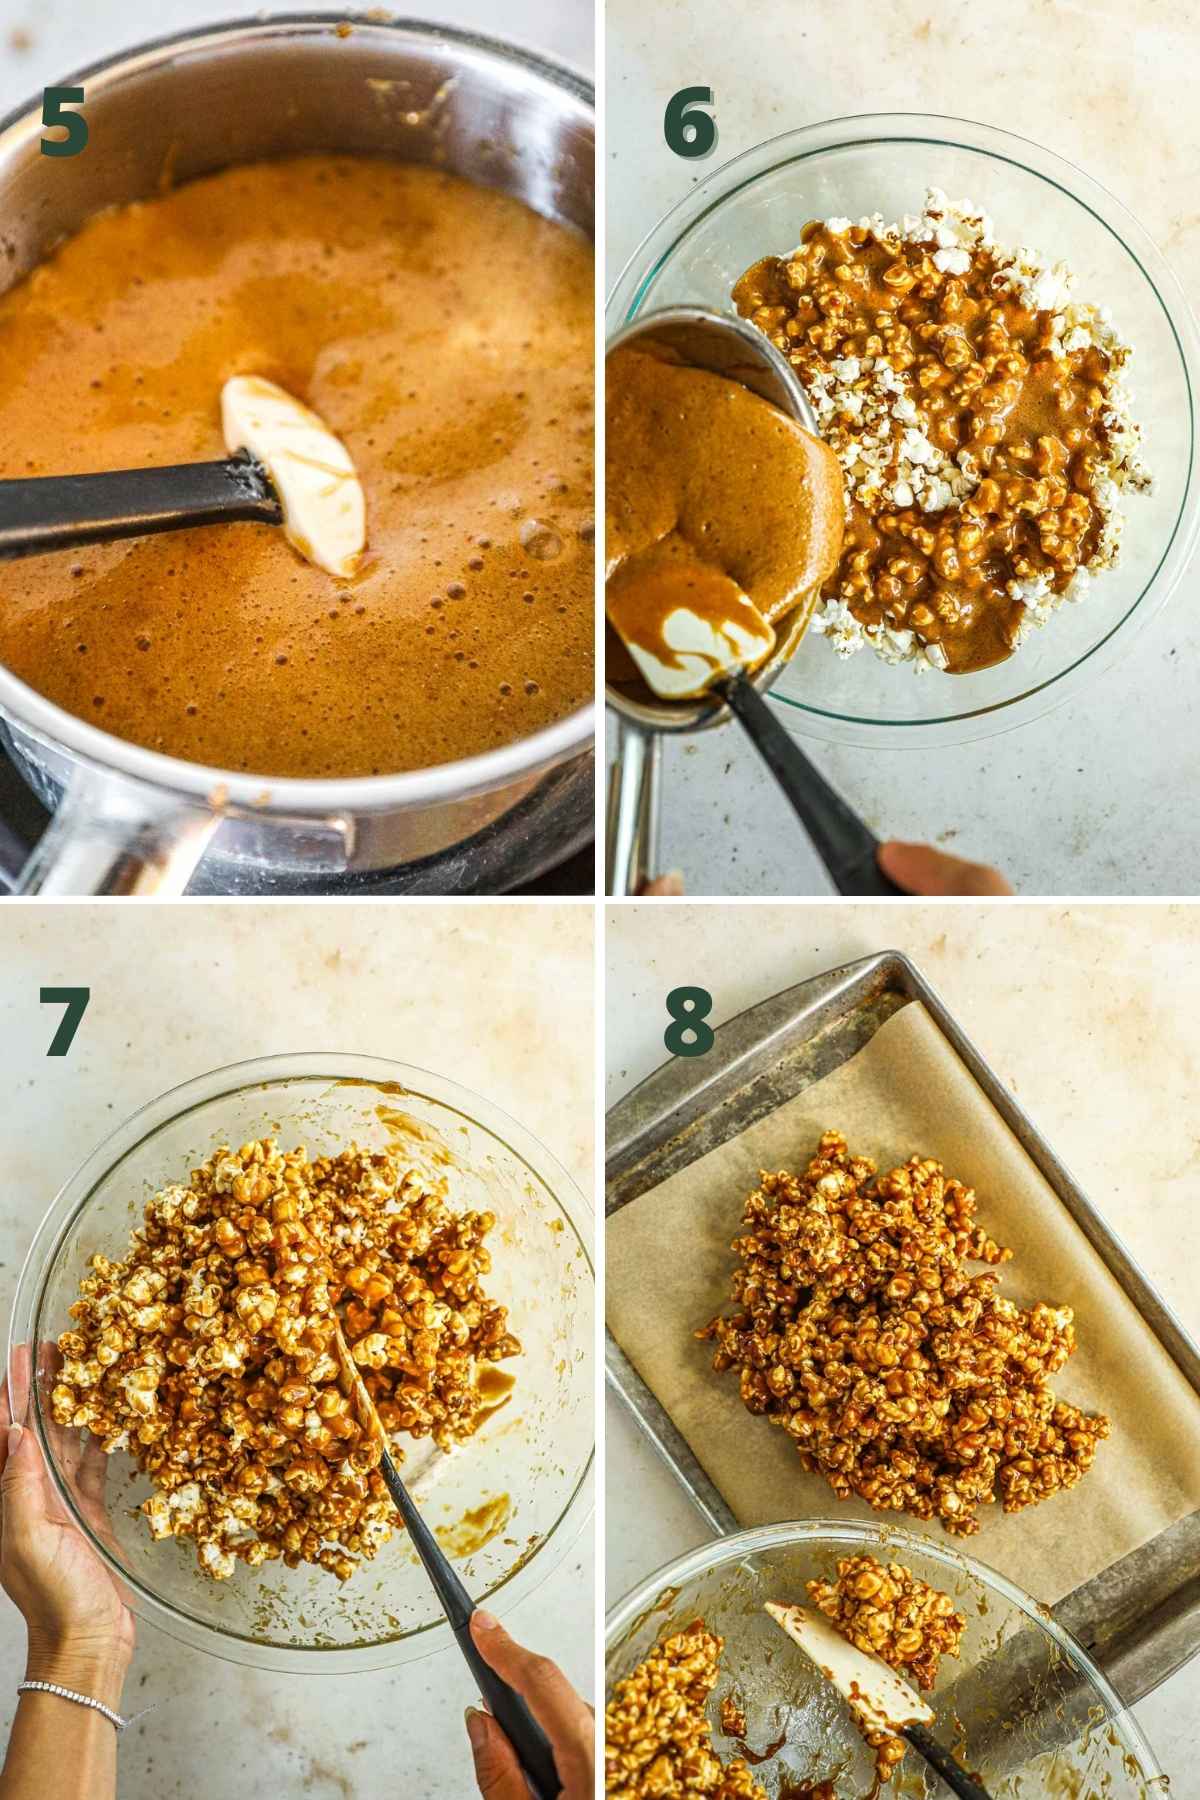 Steps to make miso caramel popcorn, including making the caramel sauce, pouring it over the popcorn kernels, mixing the popcorn and sauce, and spreading the popcorn on a baking sheet.